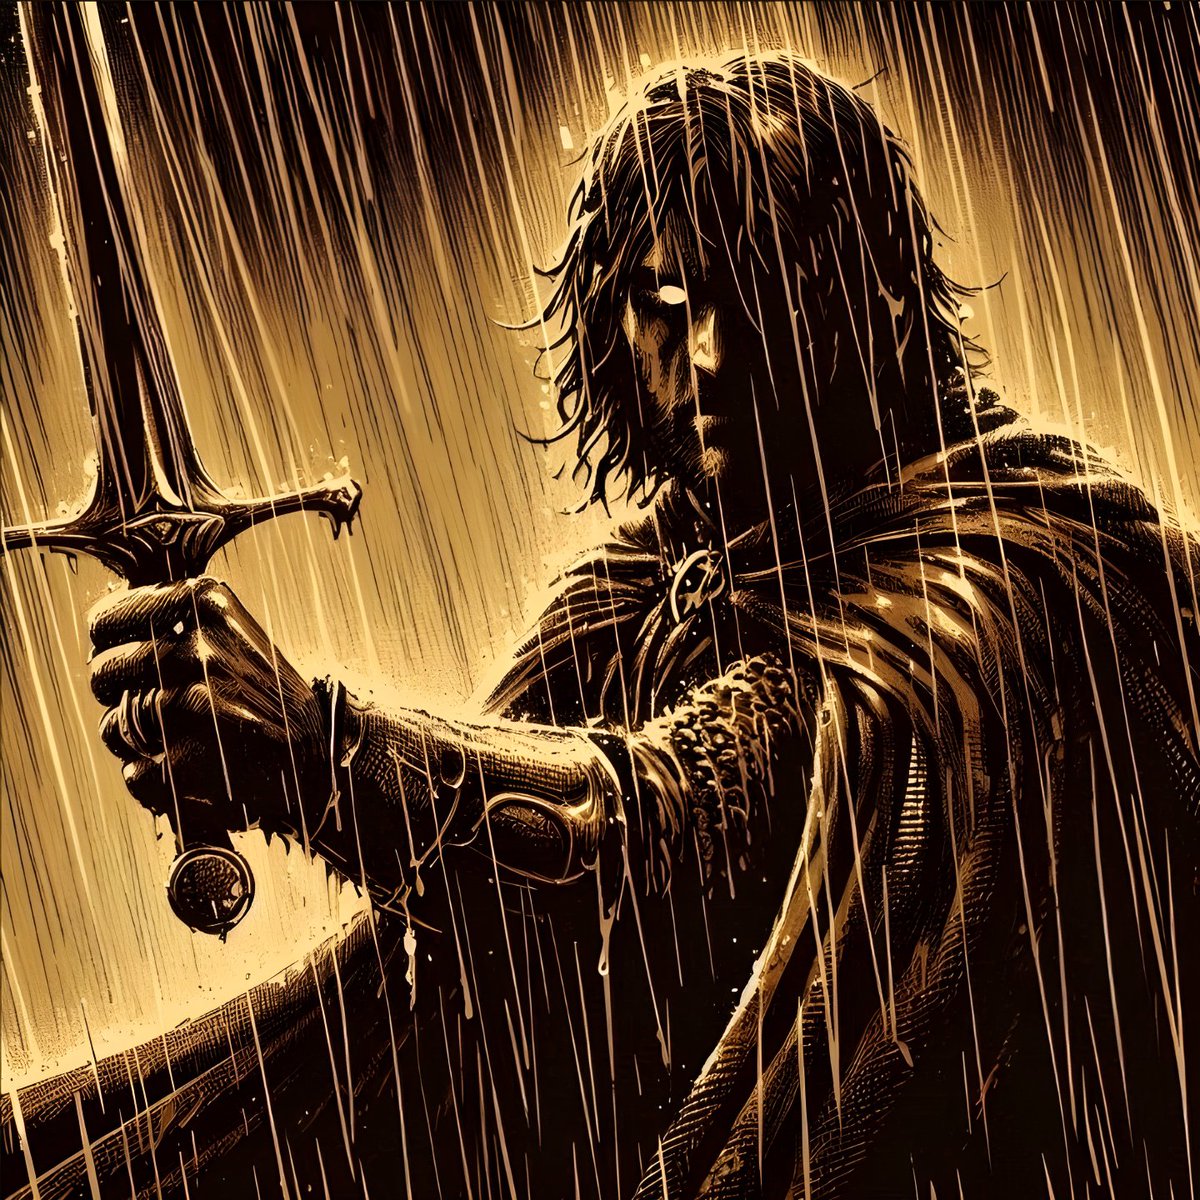 Aragorn was a reluctant king and that made him a great king.
#TheLordOfTheRings